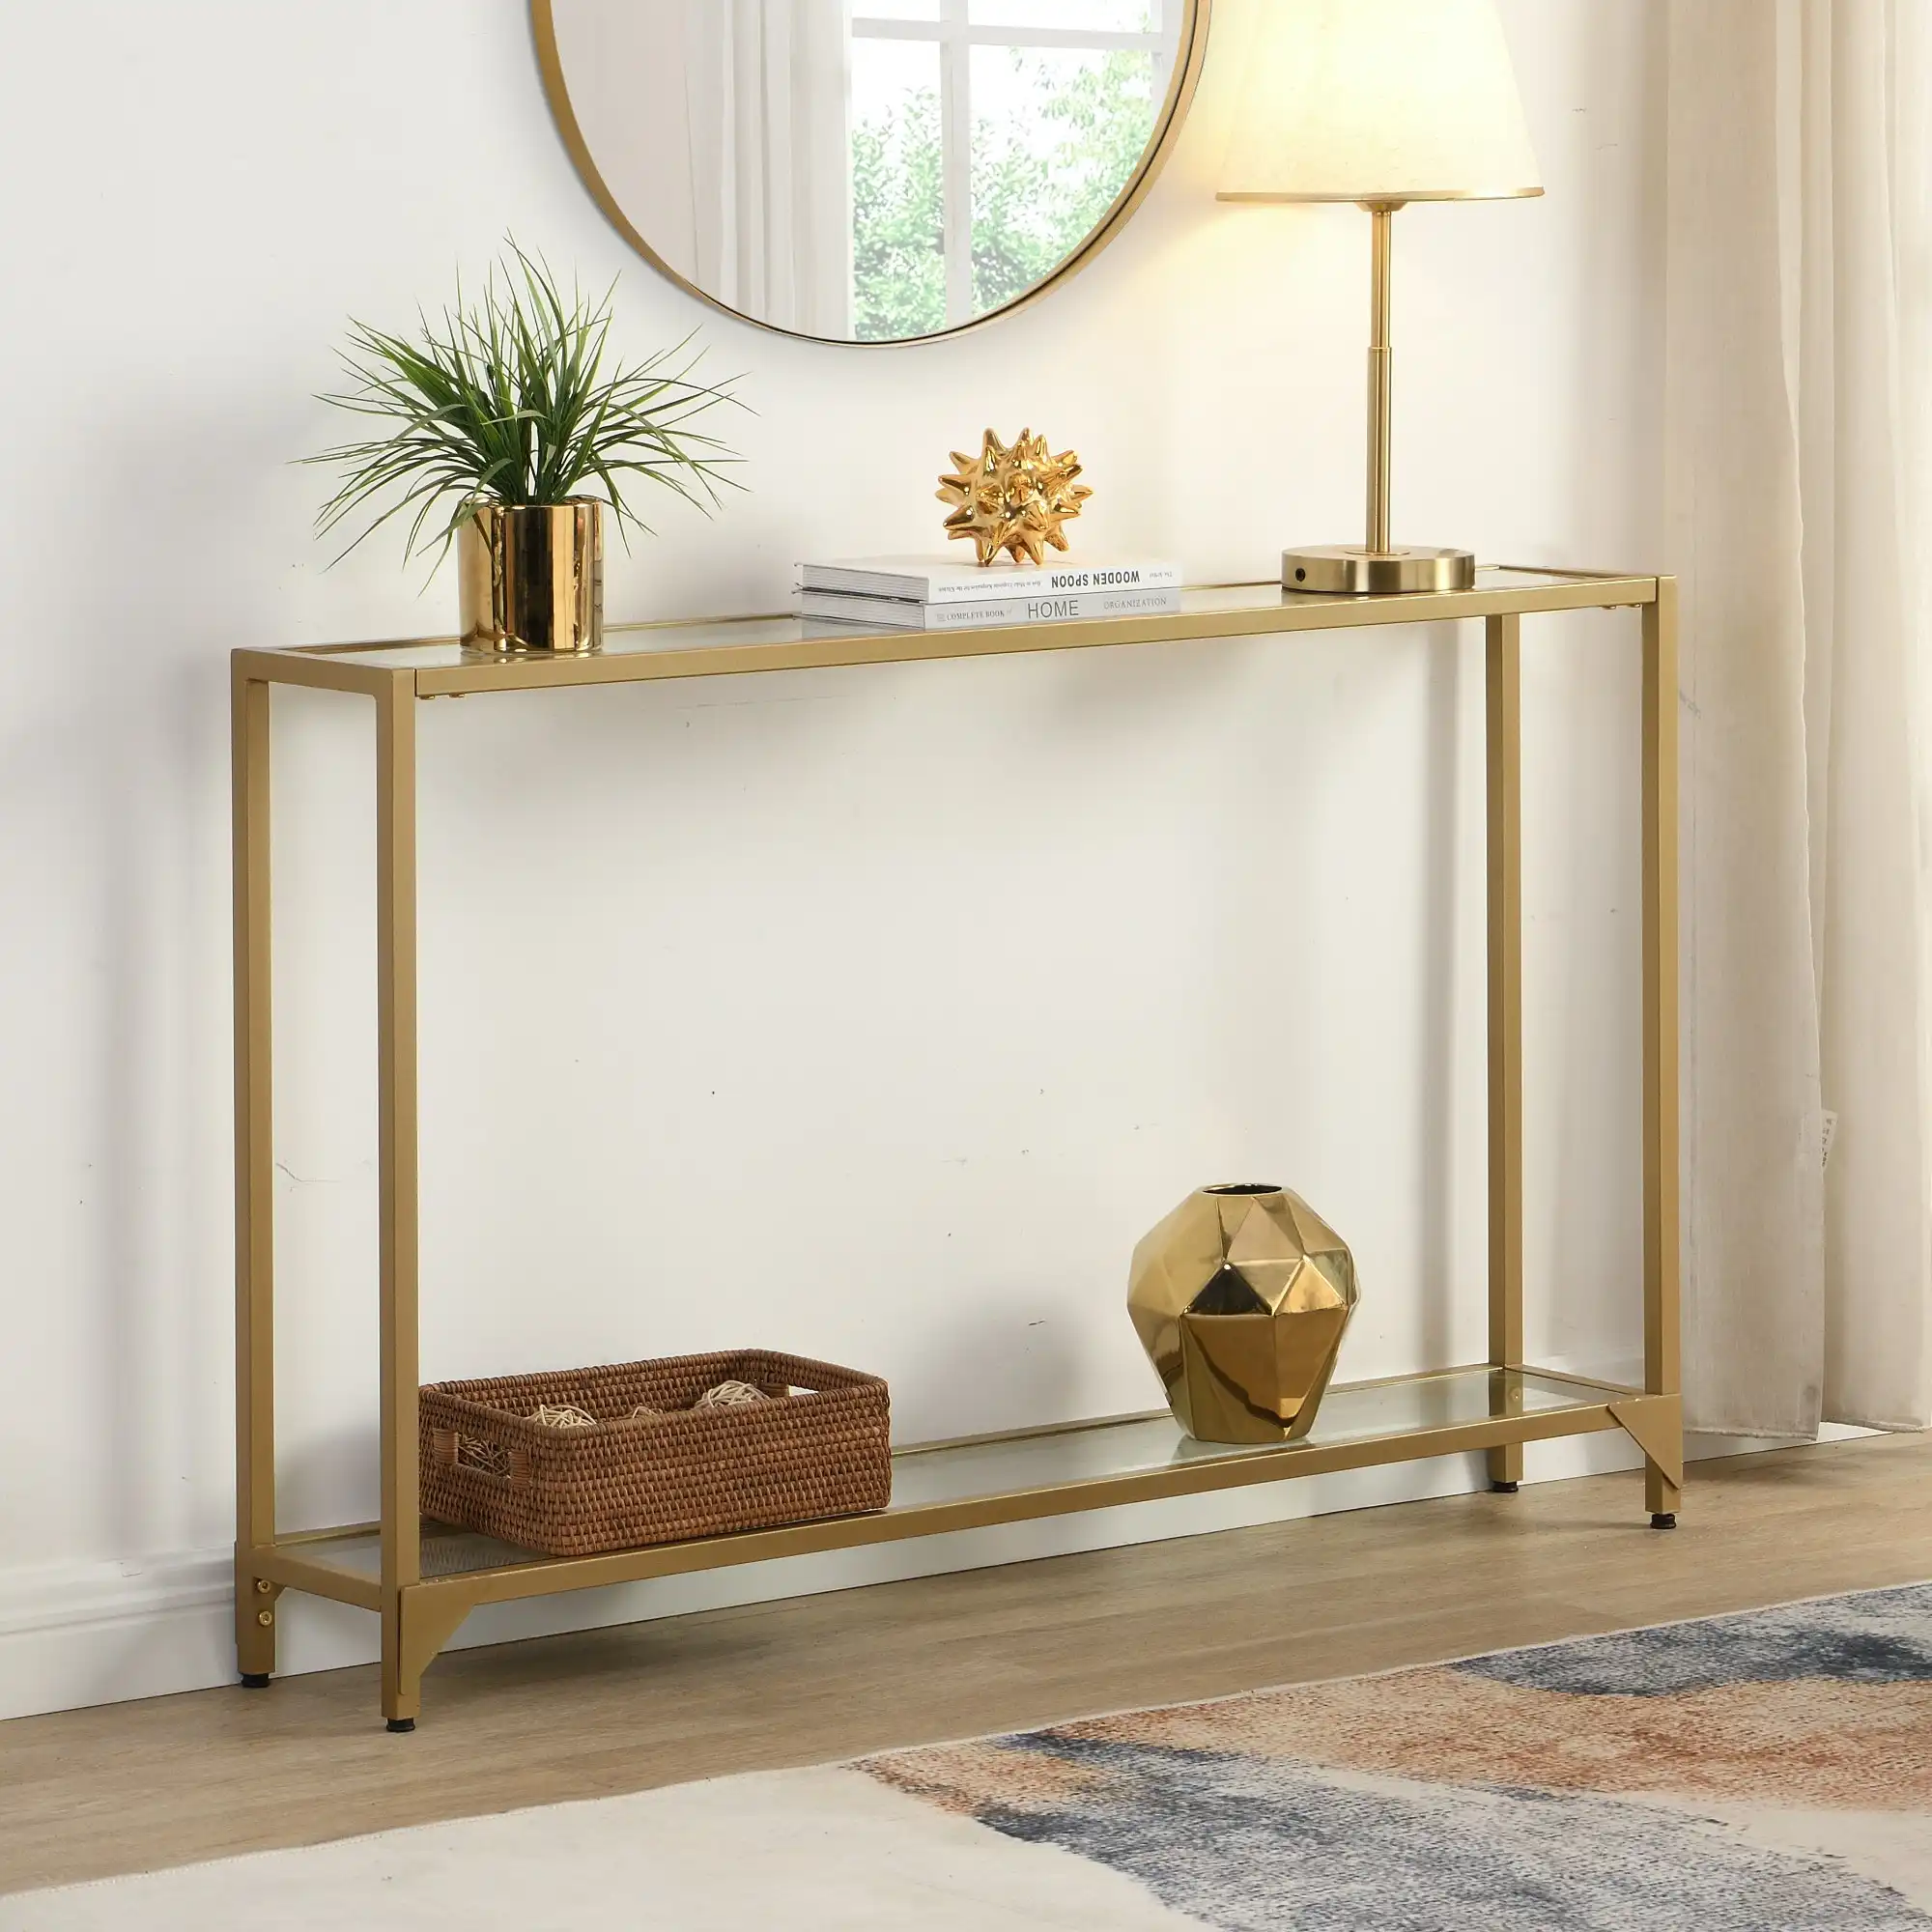 HLIVING 2 Tier Glass Couch Table, 120cm Long Modern Entryway Table, Tempered Glass Table, Gold Finish